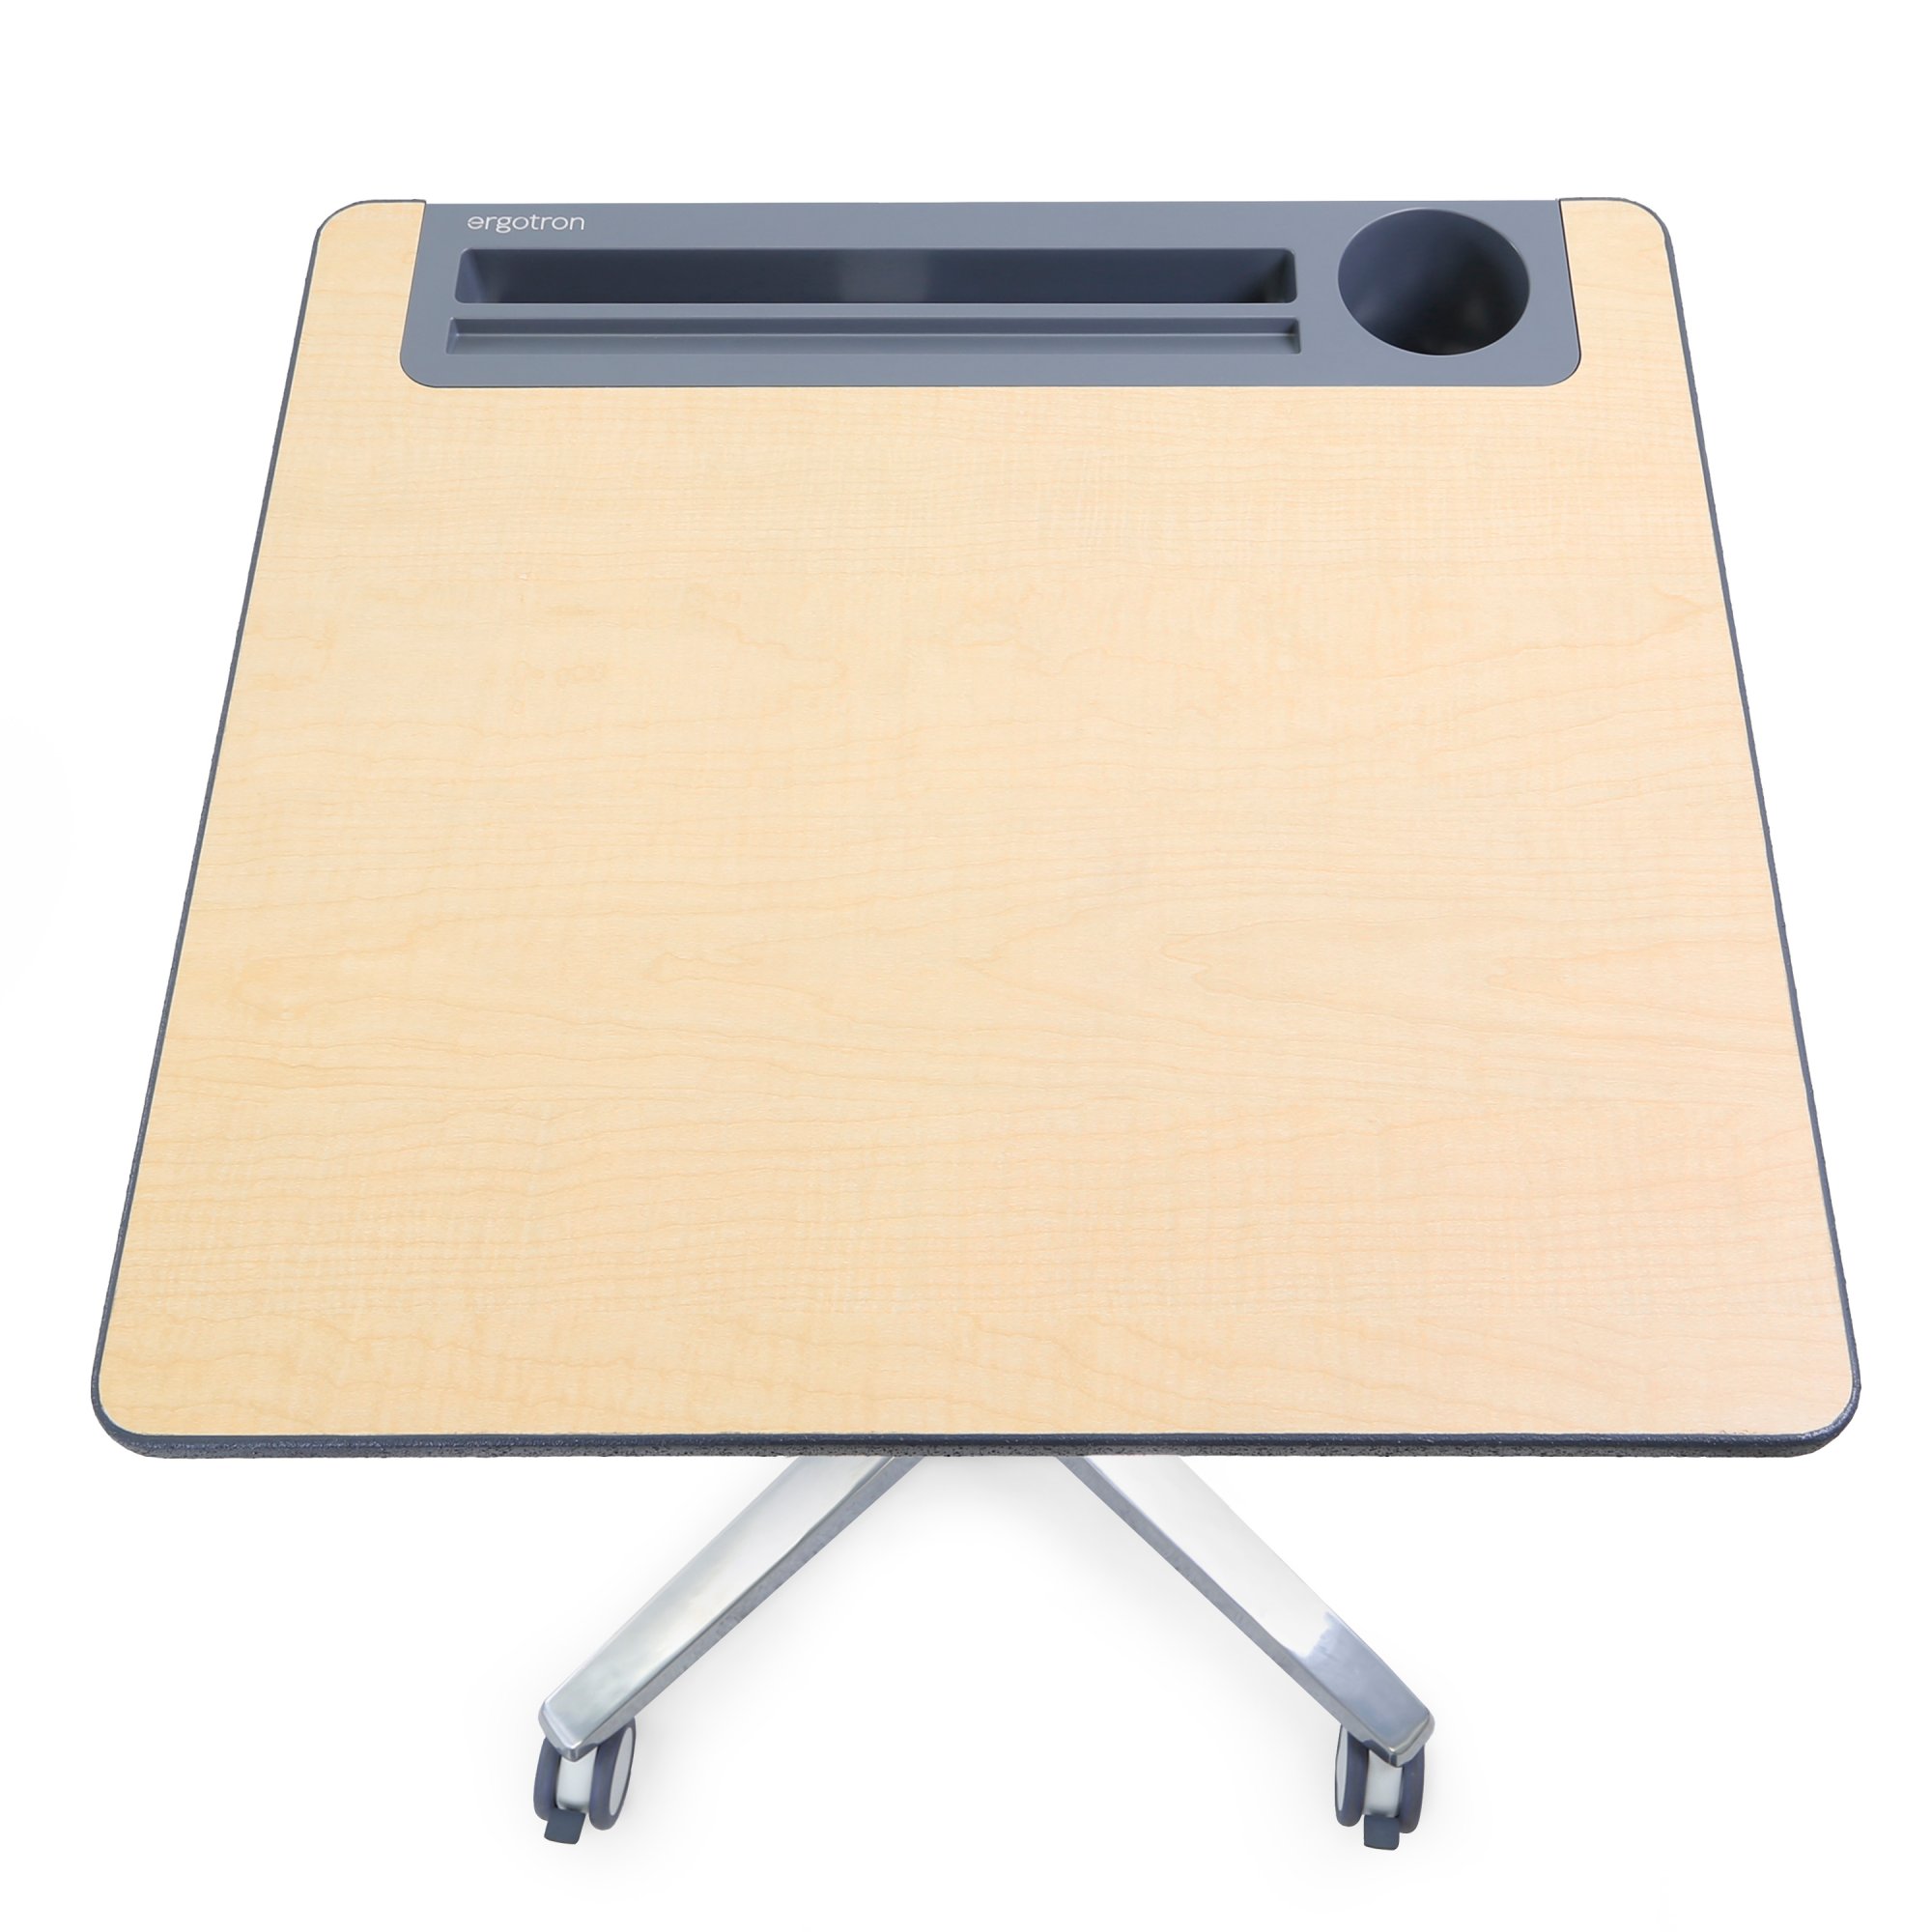 Large worksurface - Includes cup holder, tablet slot and pen tray, plus backpack hook